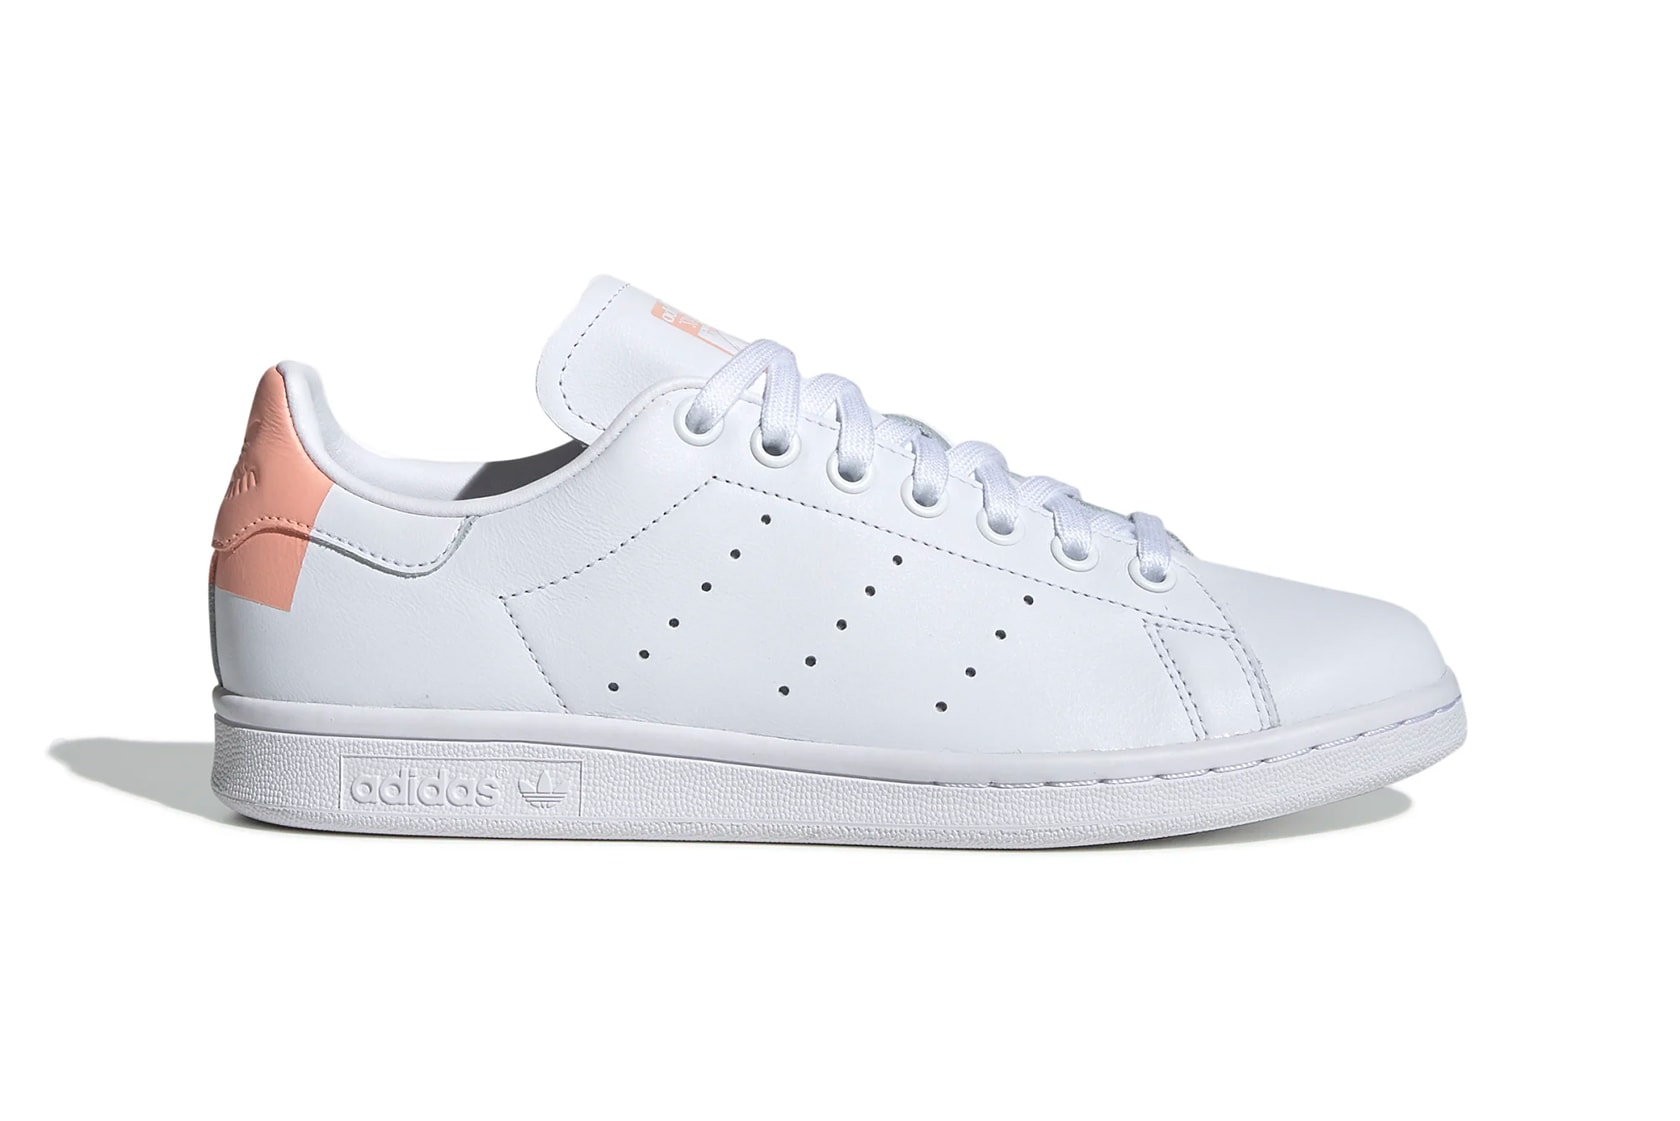 adidas stan smith cloud white glow pink color blocked tennis sneaker